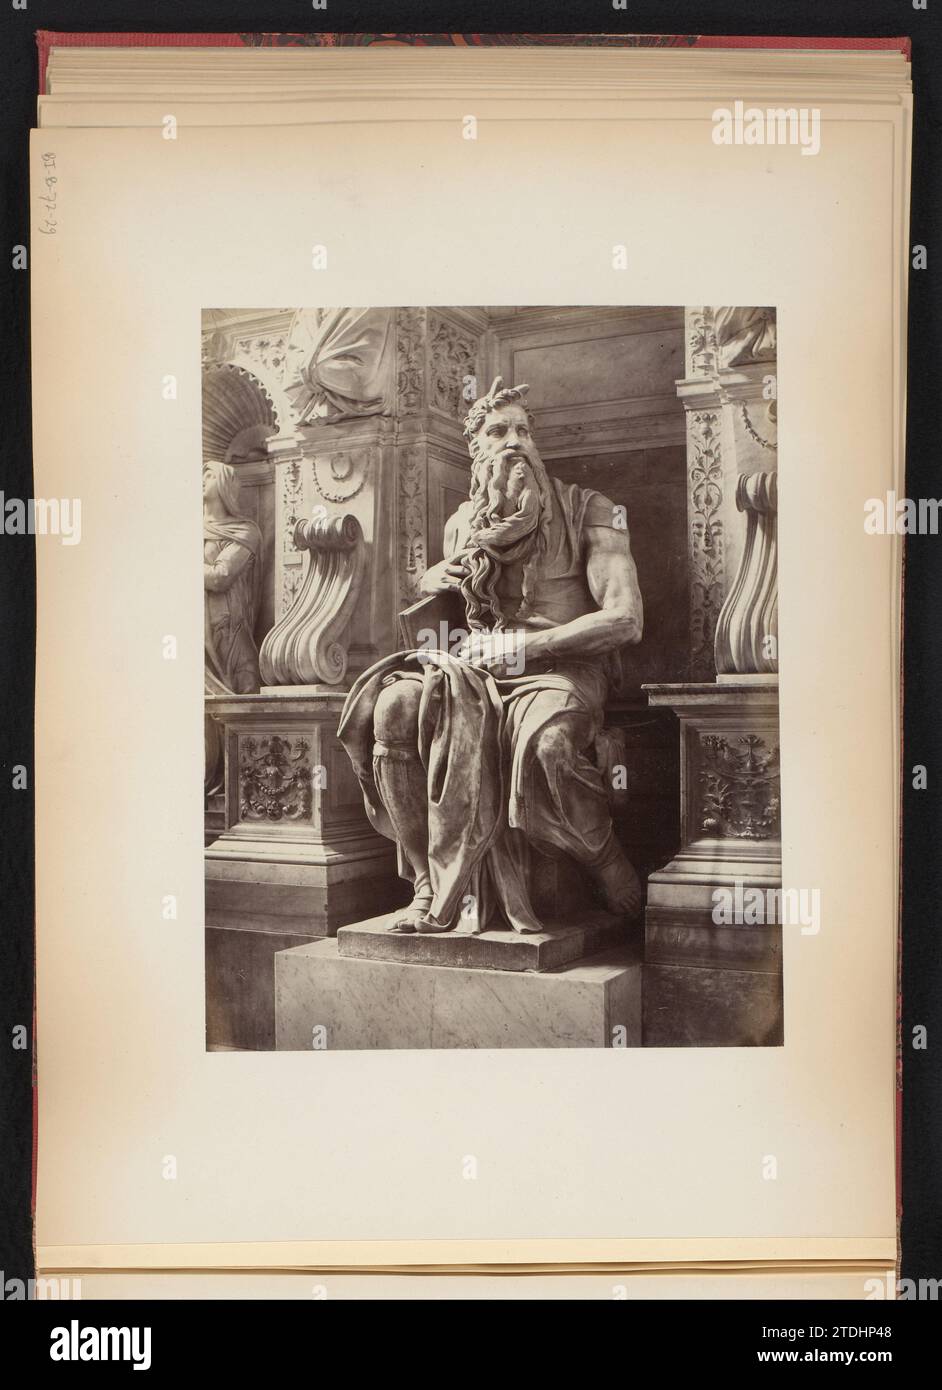 Sculpture of Mozes by Michelangelo, monument for Julius II, S. Pietro in Vincoli in Rome, Italy, Anonymous, After Michelangelo, 1870 - 1890 This photo is part of an album. Rome paper albumen print  San Pietro in Vincoli This photo is part of an album. Rome paper albumen print  San Pietro in Vincoli Stock Photo